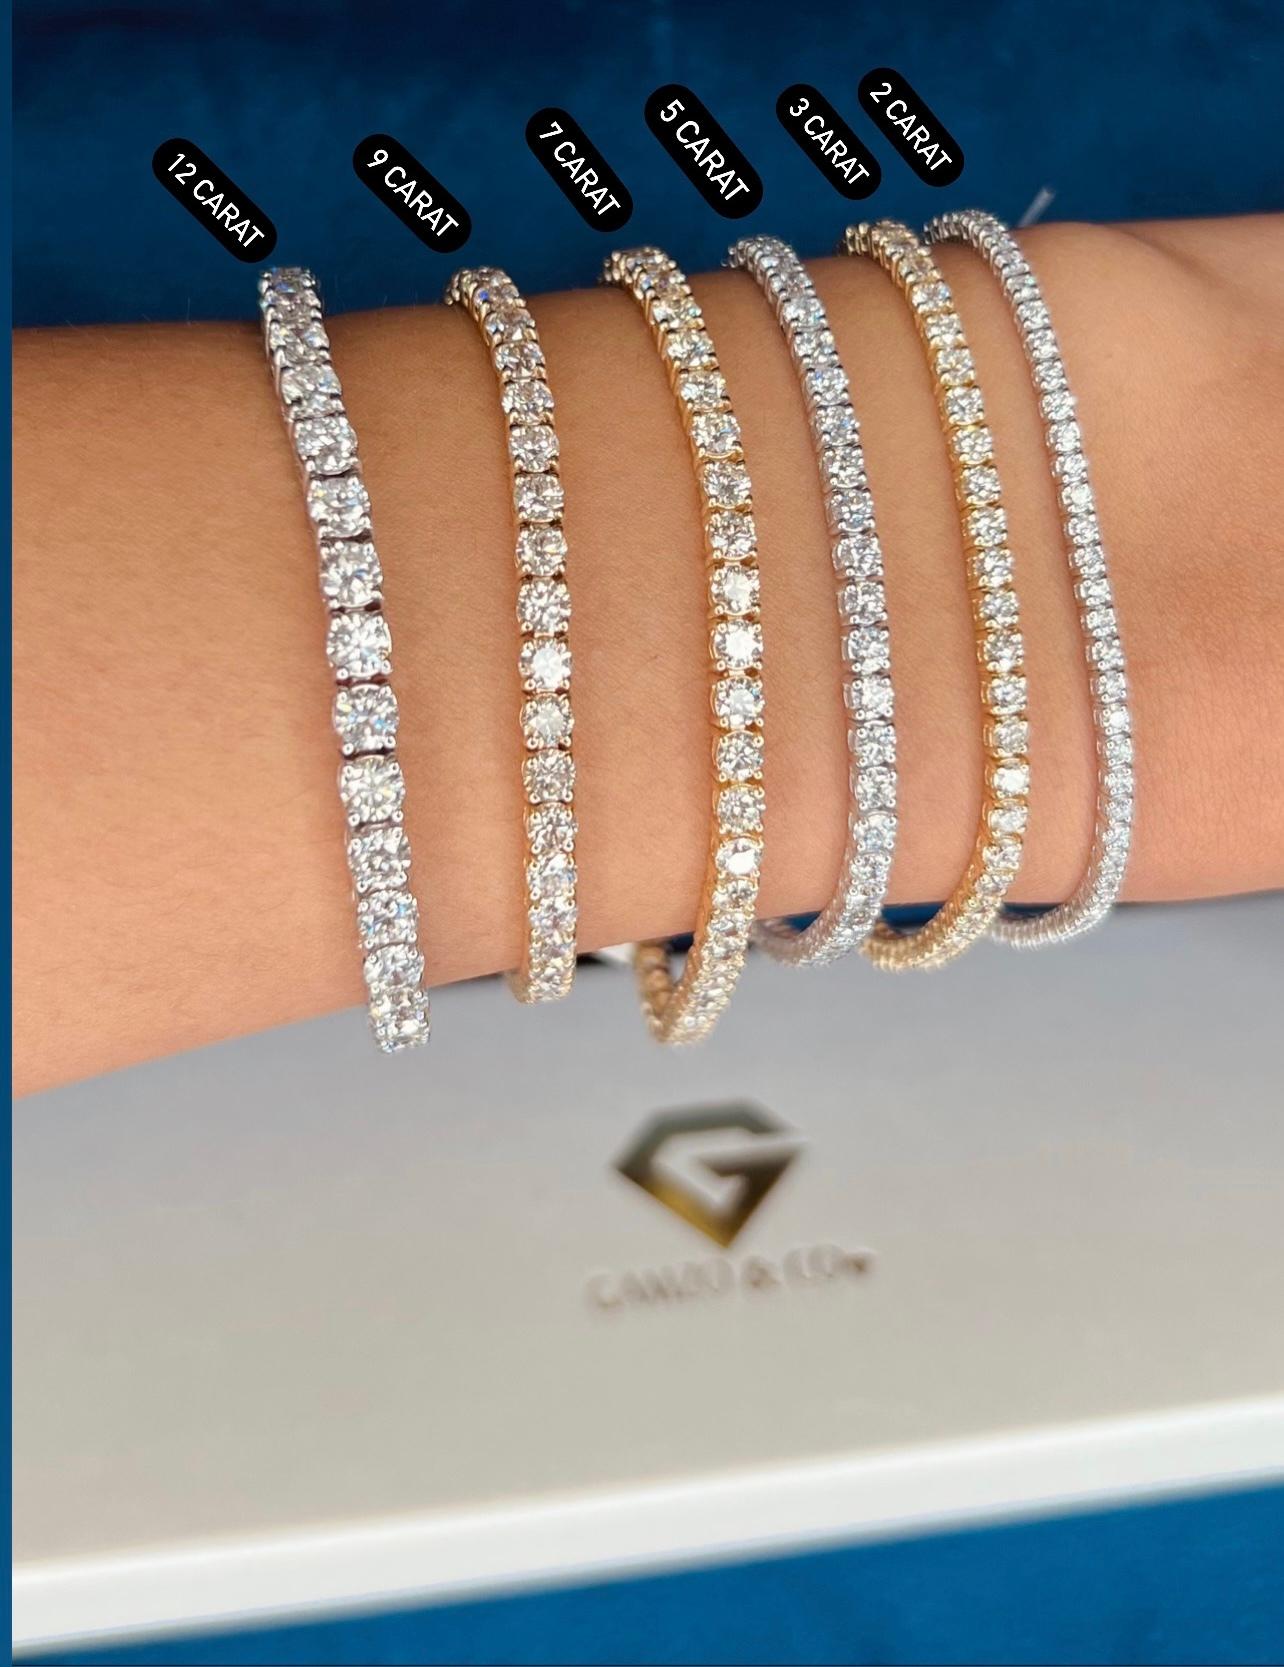 This diamond tennis bracelet features beautifully cut round diamonds set gorgeously in 14k gold.

Metal: 14k Gold
Diamond Cut: Round Natural Diamond 
Total Diamond Carats: 3ct
Diamond Clarity: VS
Diamond Color: F-G
Color: White Gold
Bracelet Length: